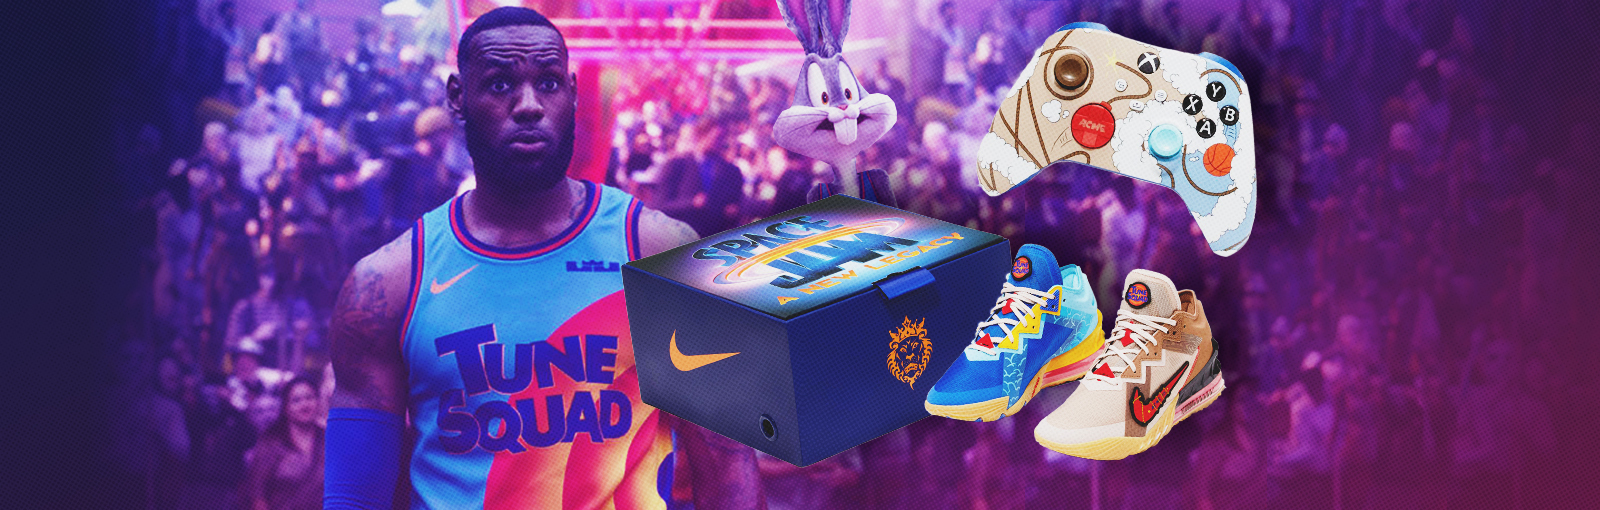 Nike Snkrs Is Dropping A Space Jam Lebron Bundle Featuring An Exclusive Xbox Controller - roblox hallows eve event feat eddie redmayne